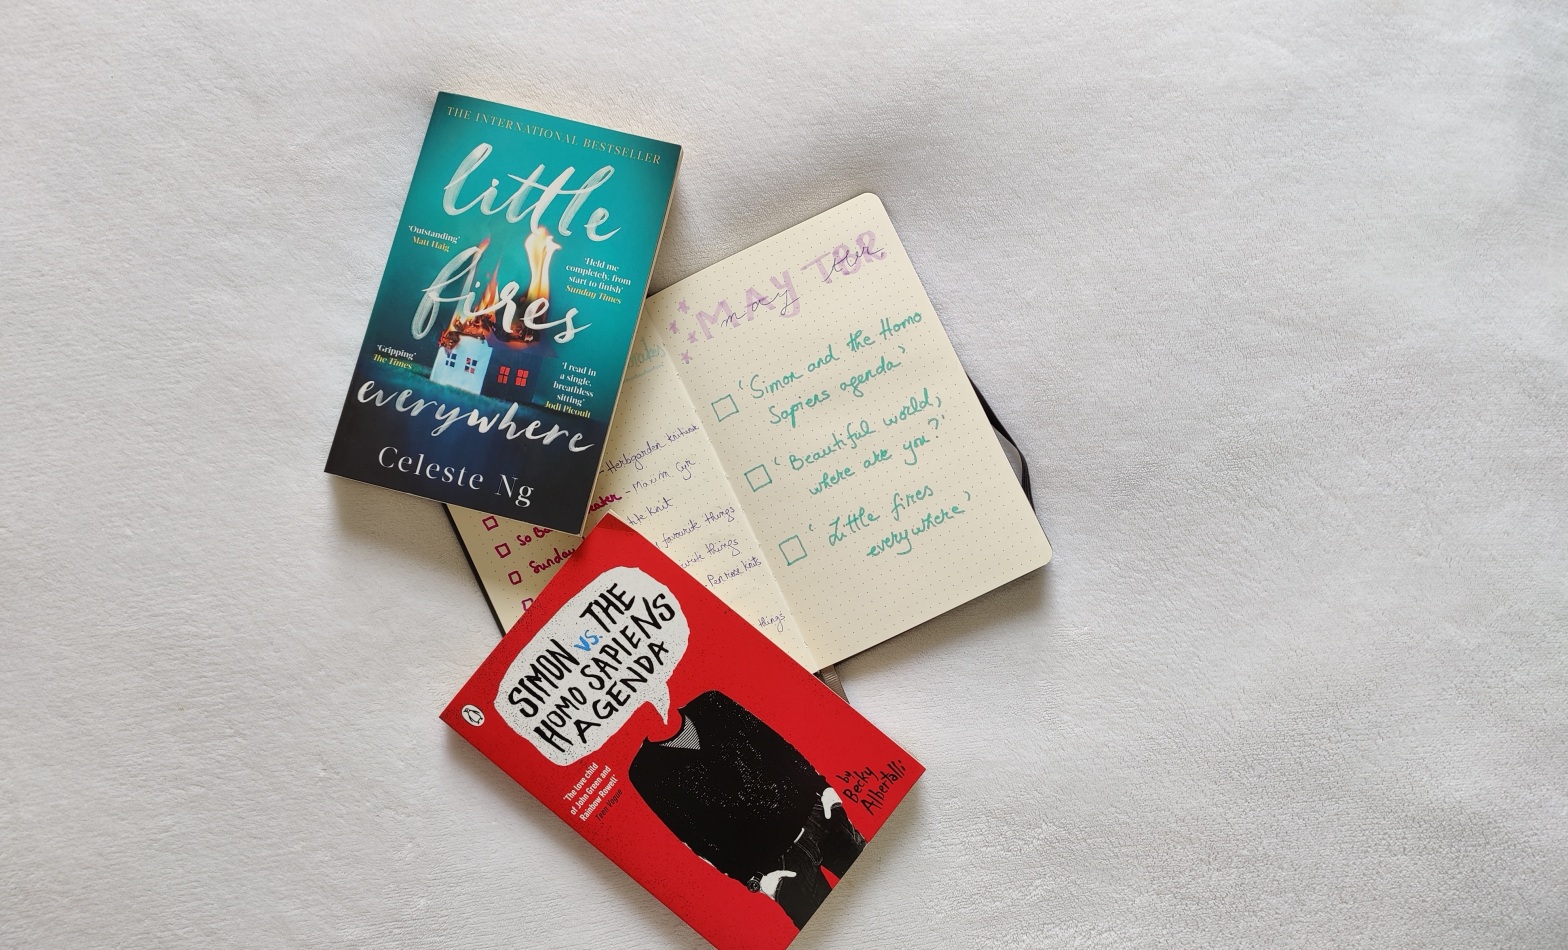 Paperbacks of 'Simon vs the Homo Sapiens Agenda' and 'Little Fires Everywhere' on a white blanket on top of a bullet journal with a May TBR list written on it.